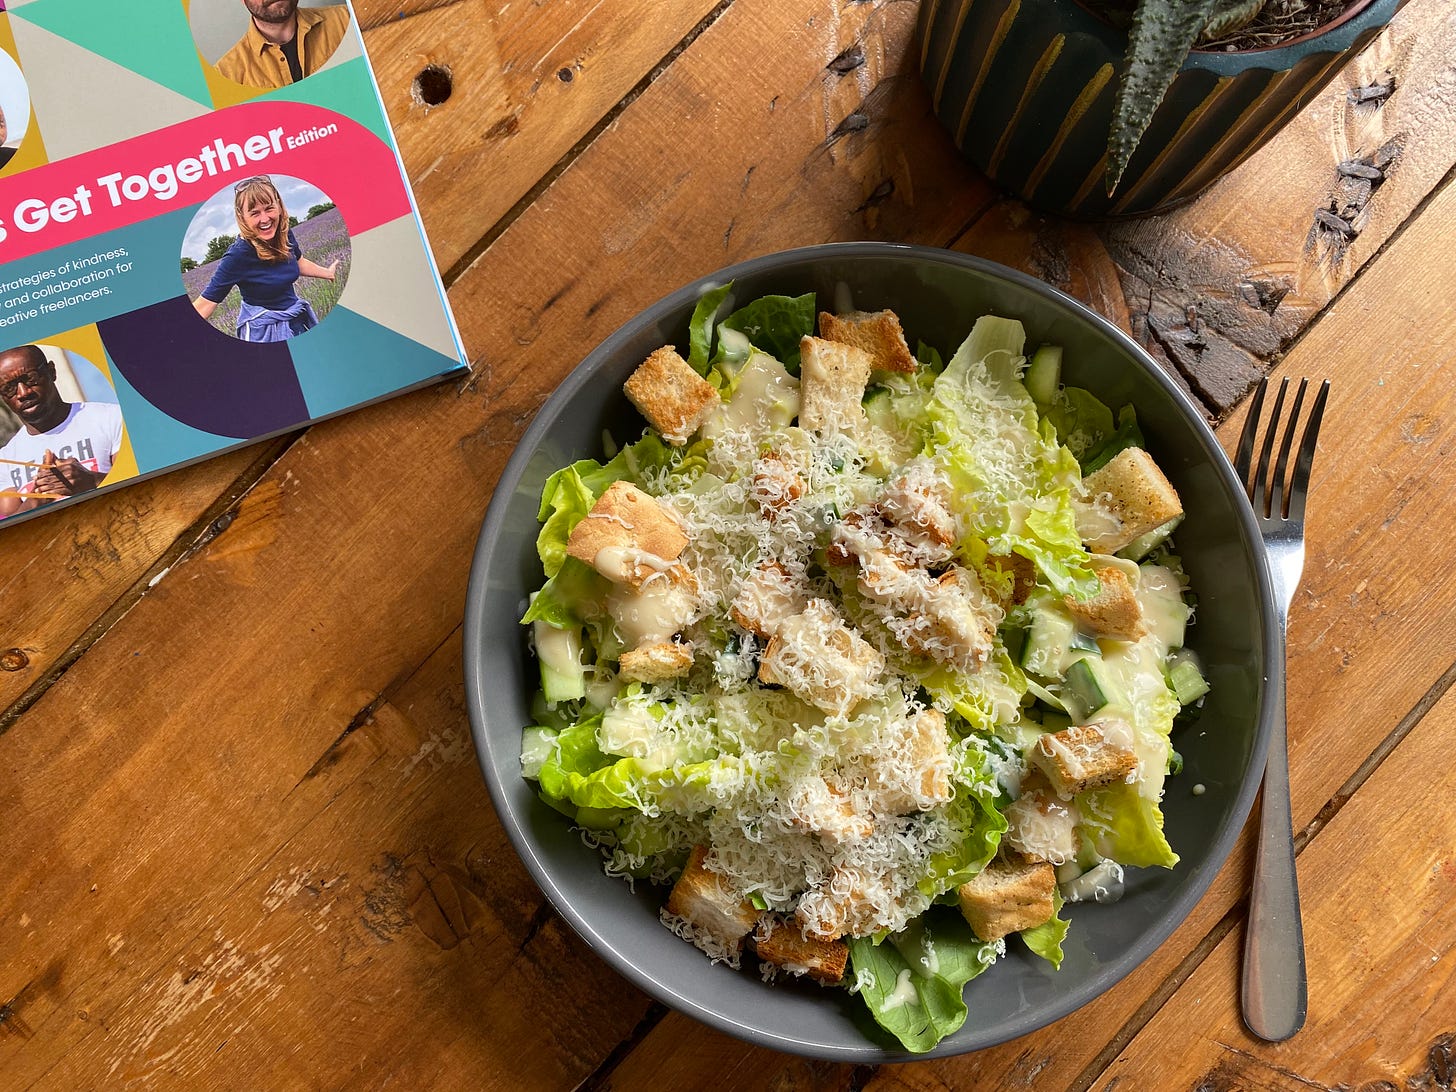 bowl of salad with grated cheese, lettuce, croutons and dressing in a grey bowl on a wooden table. A magazine is placed next to it.